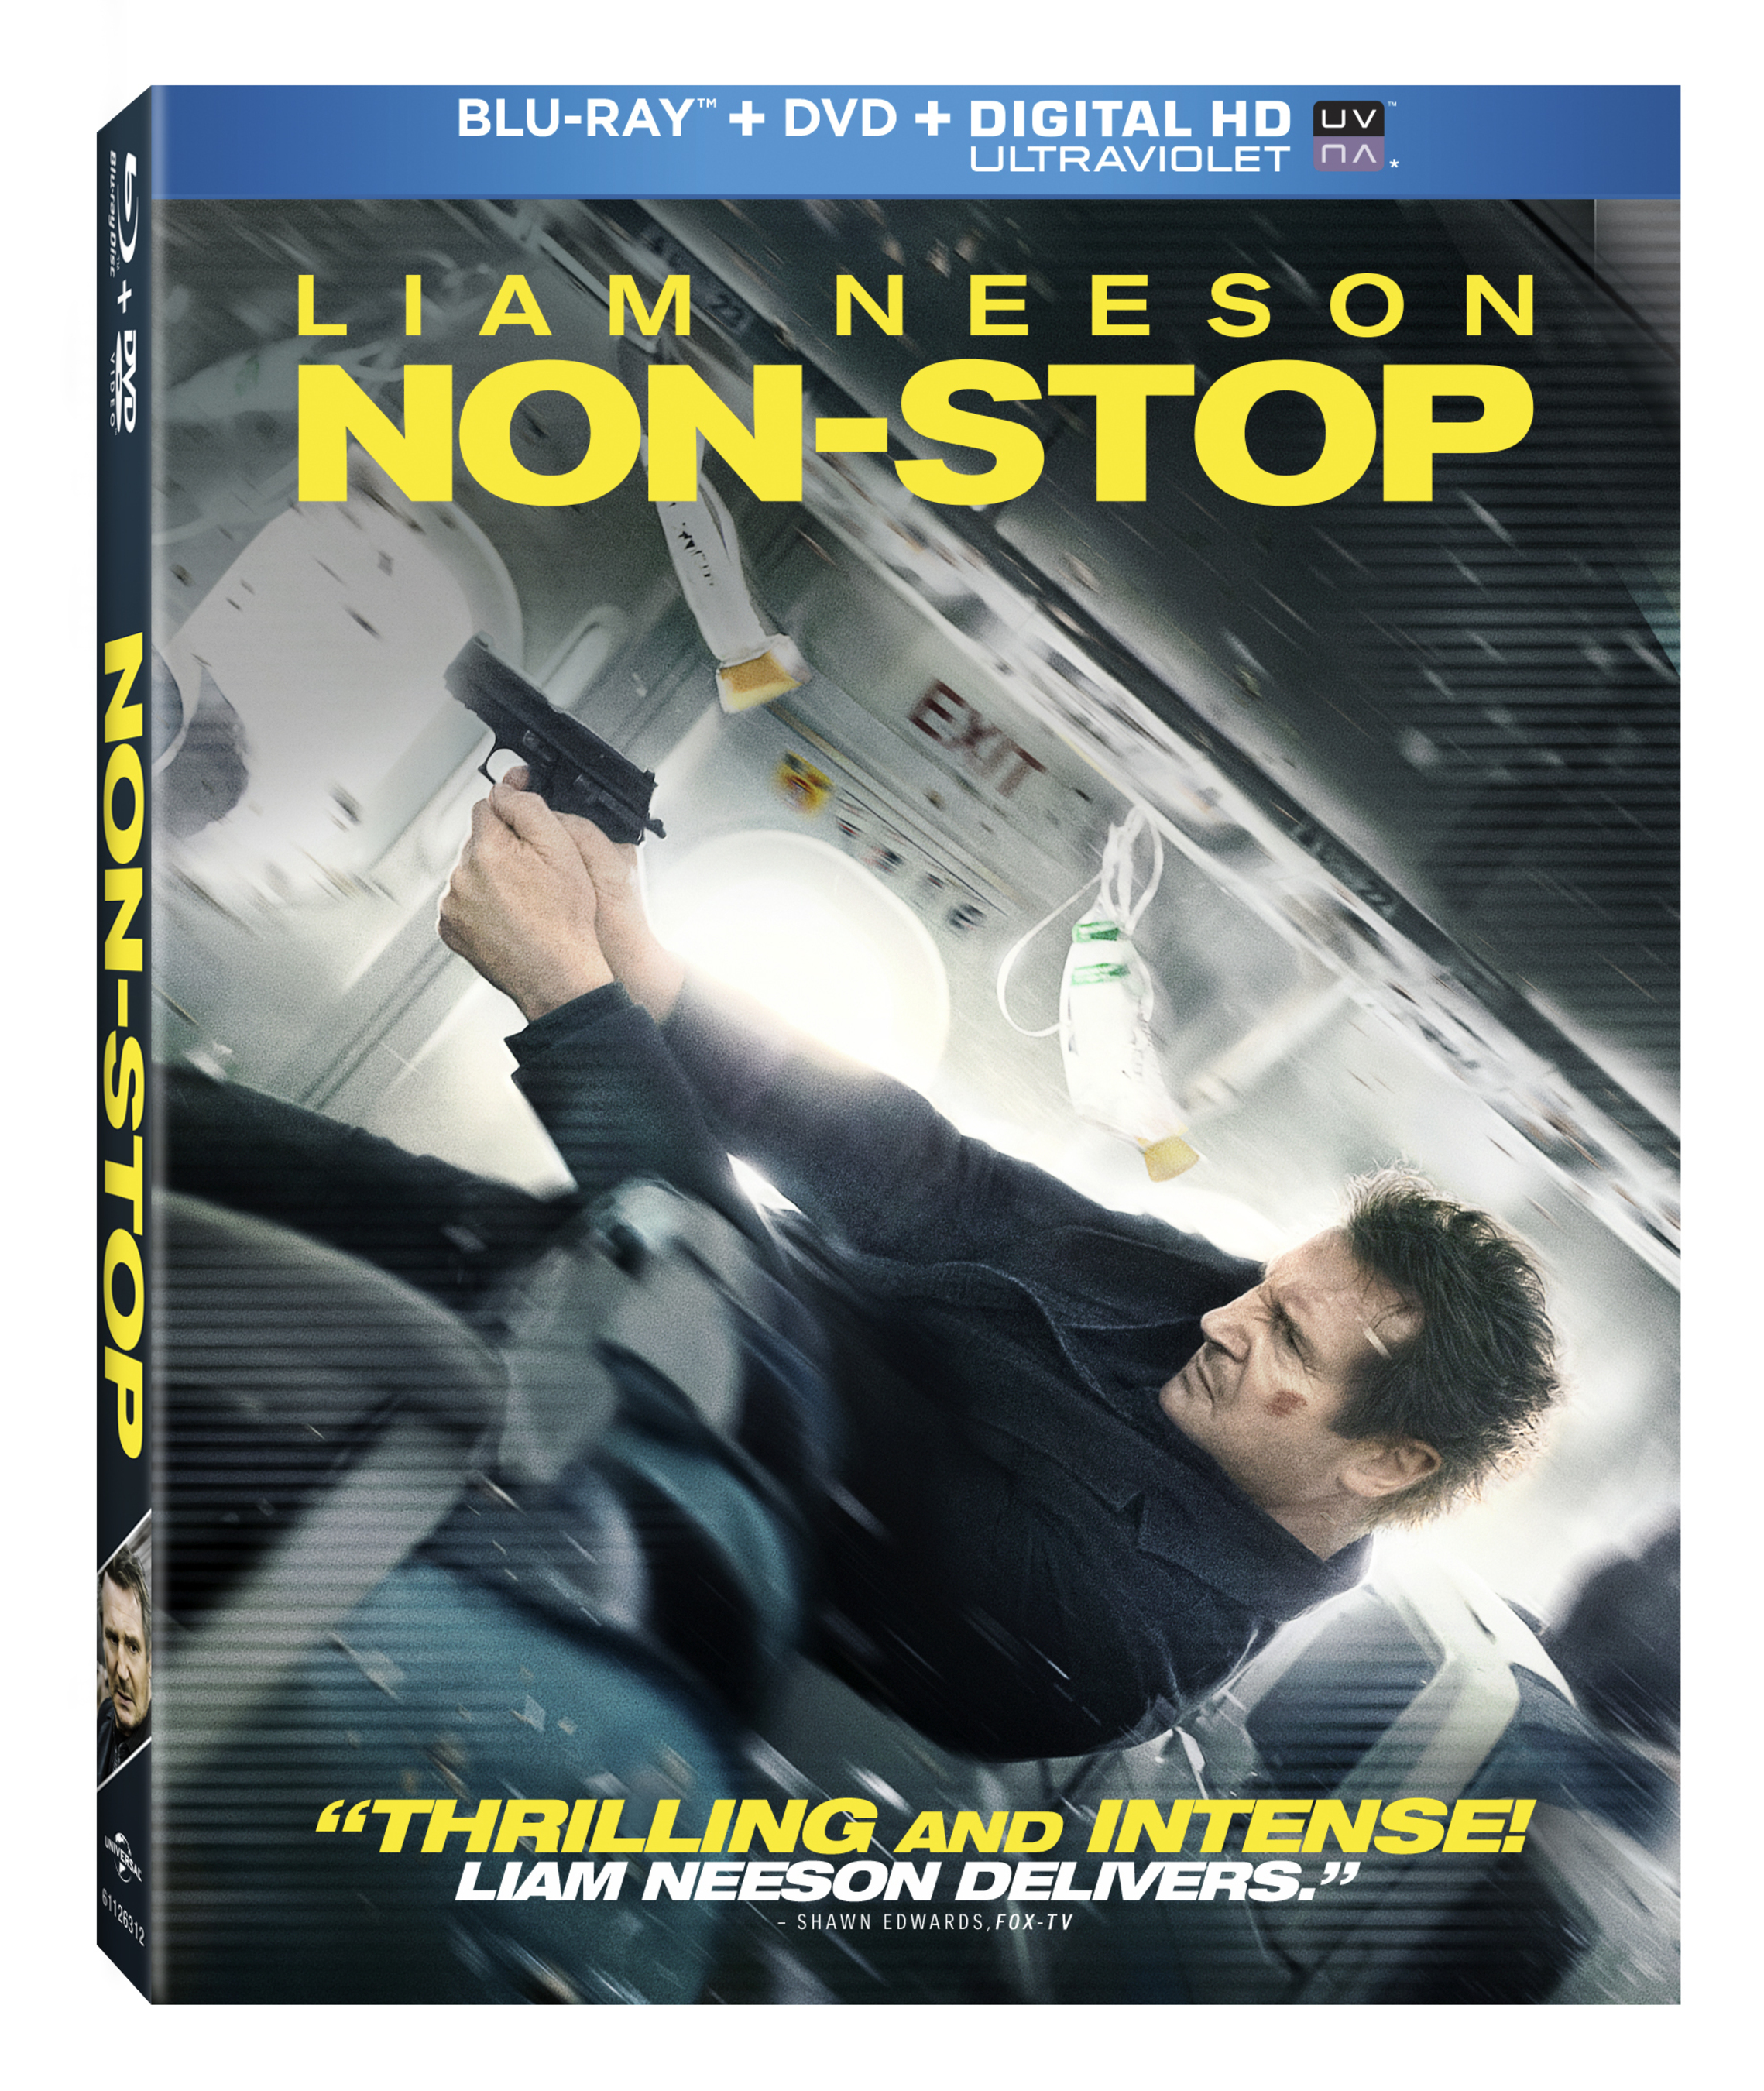 Non-Stop will be released on Digital HD on May 27 and Blu-ray/DVD on June 10.  (PRNewsFoto/Universal Studios Home...)